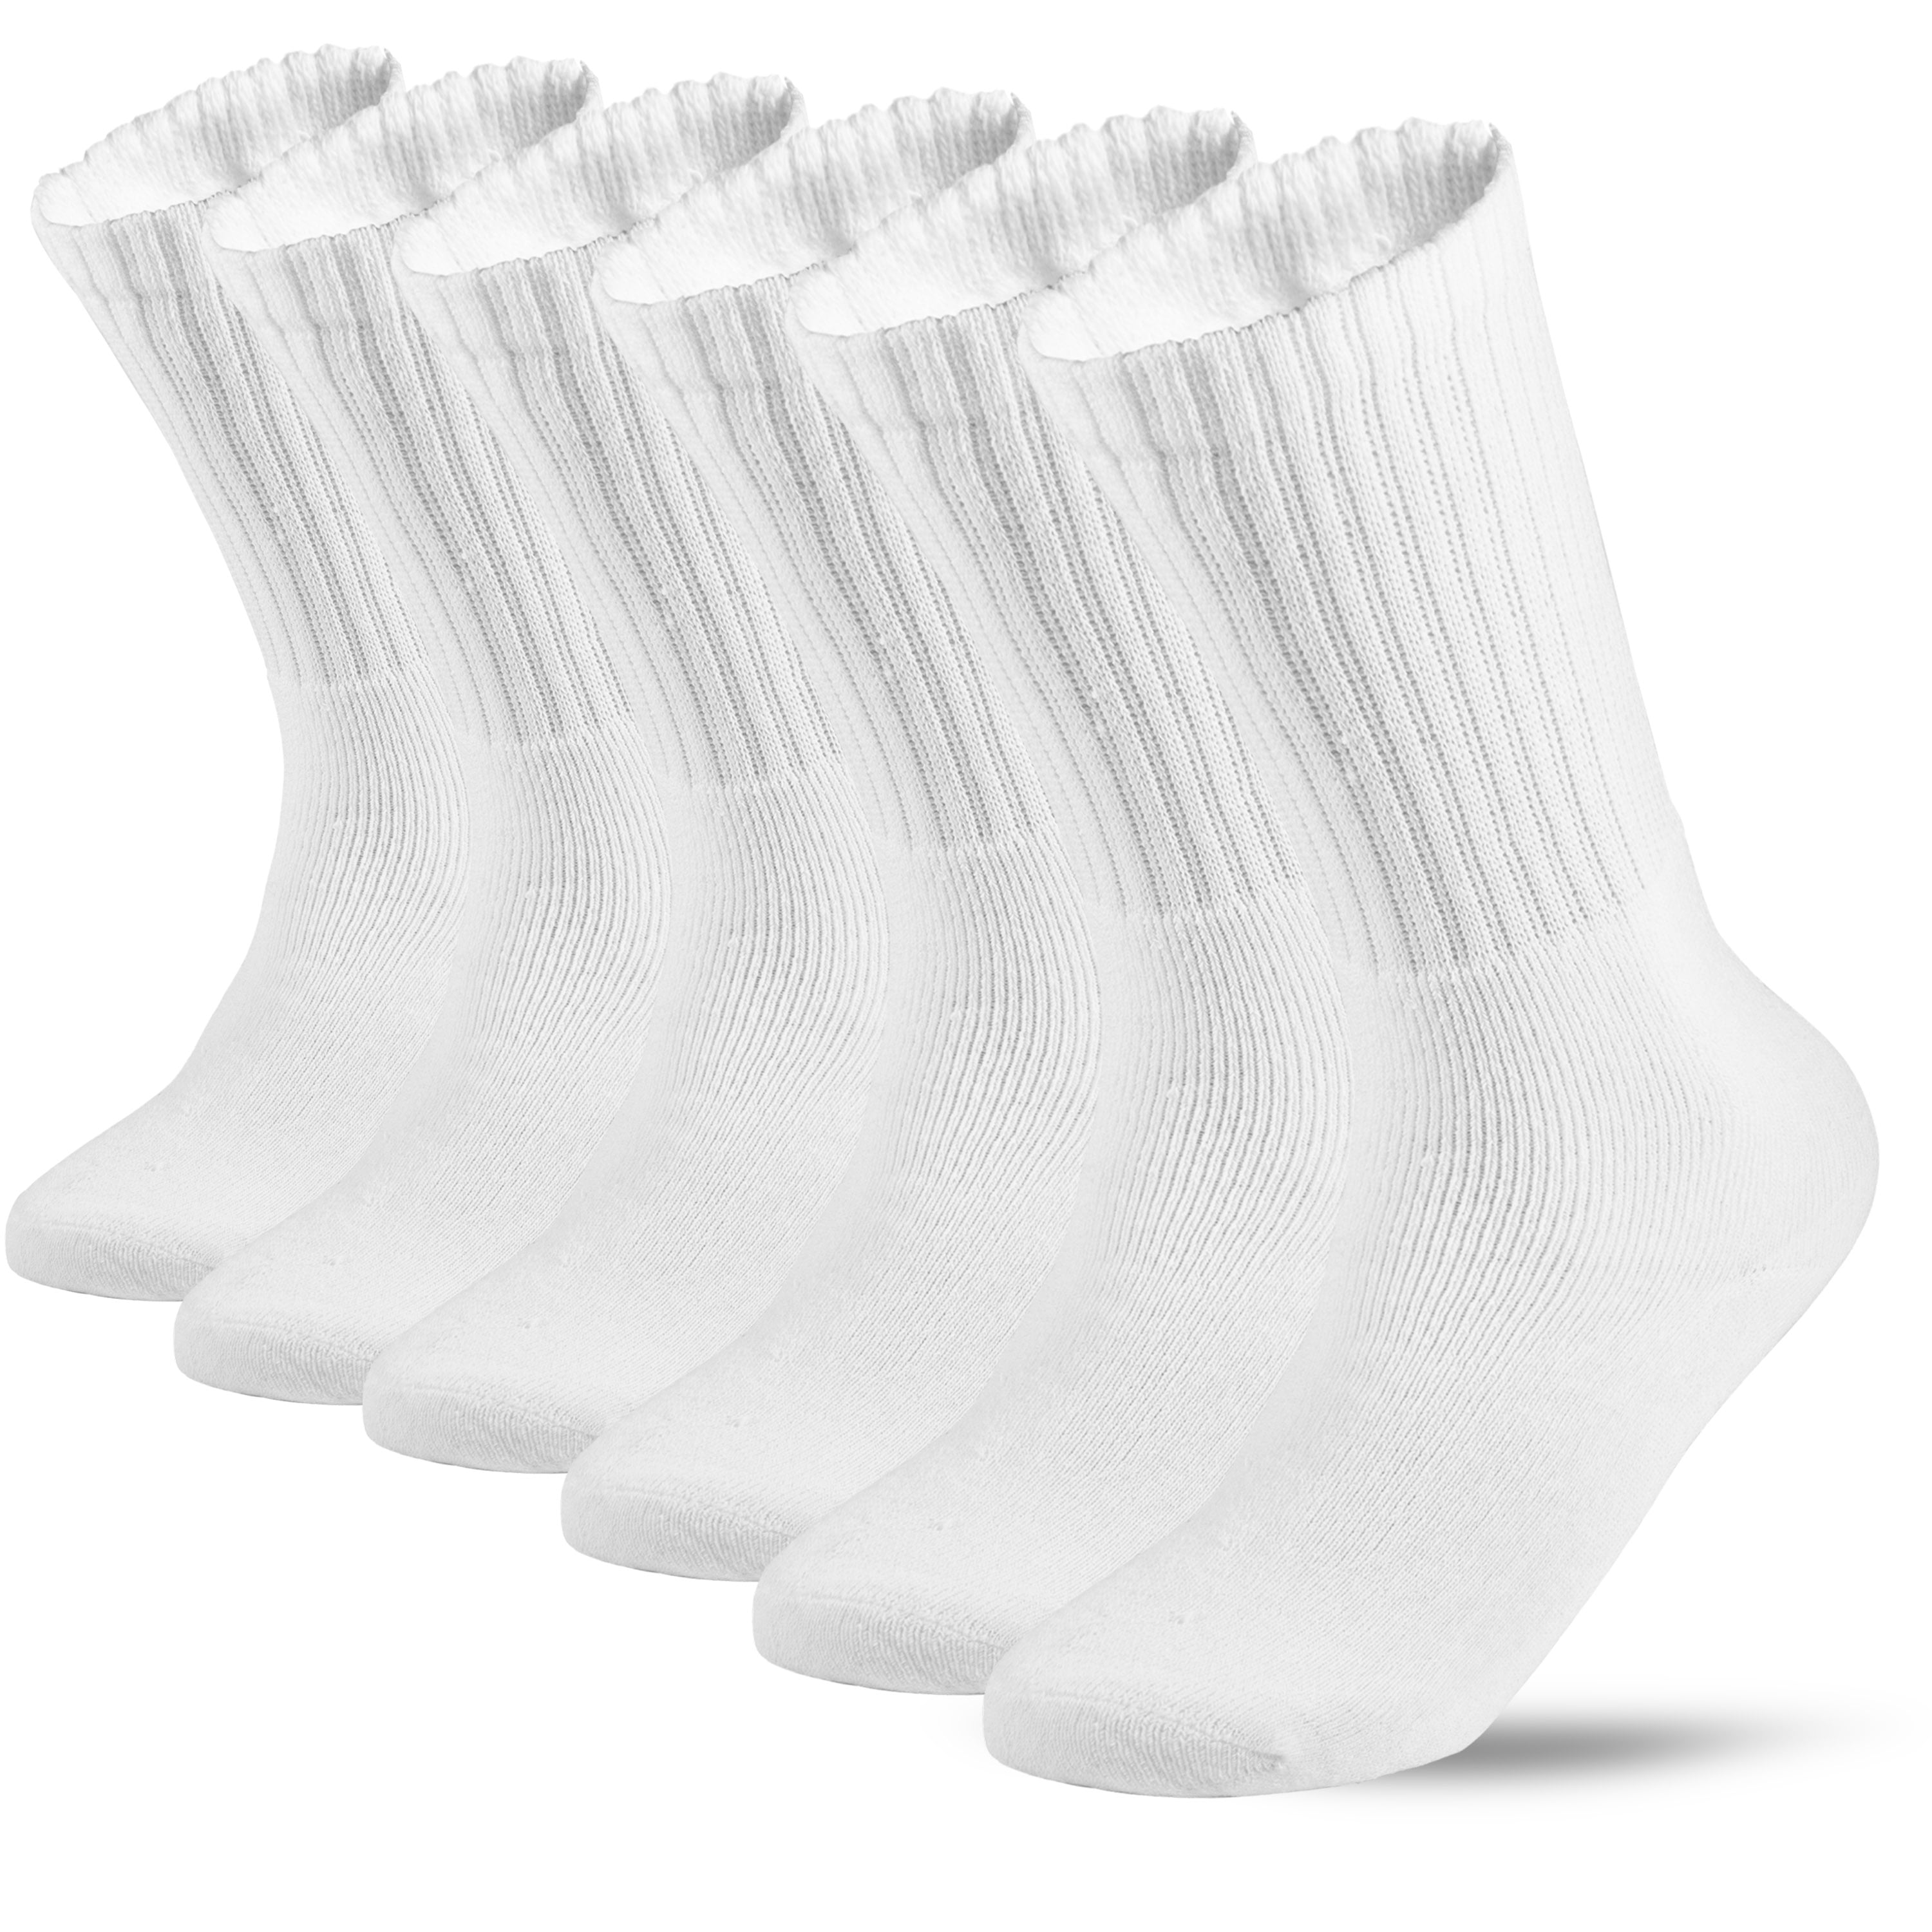 6 Pairs Men's Athletic Cotton Casual Crew Solid Sport Socks White Size ...